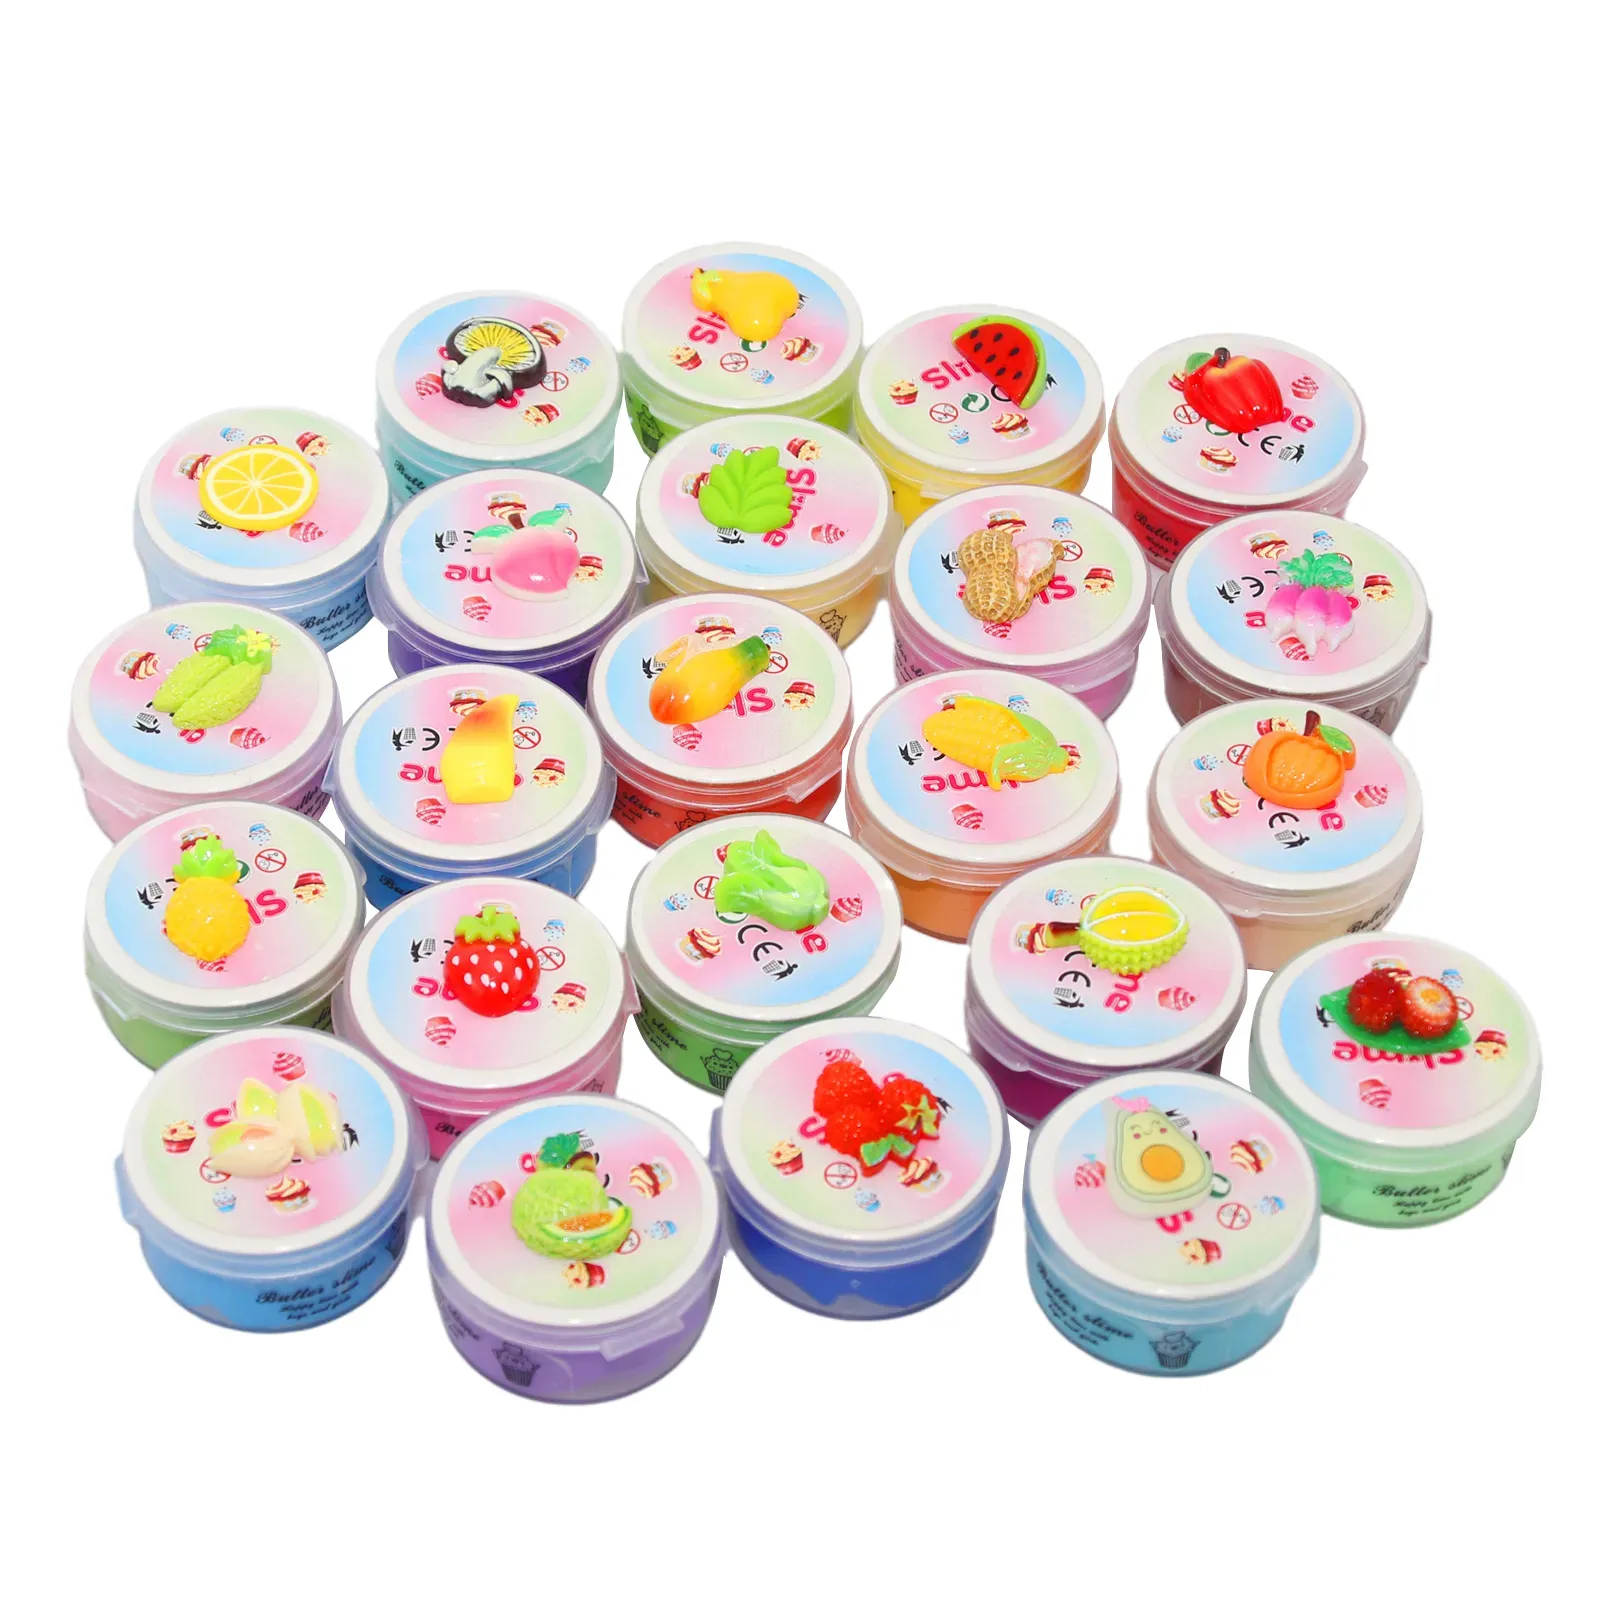 DIY Fruit Slime Toy Level Set 24 Fluffy Butter Clay Colors, Cloud Slimes,  Surprises, Art & Craft Supplies Perfect Kids Gift 1871 From  Newtoywholesale, $7.49